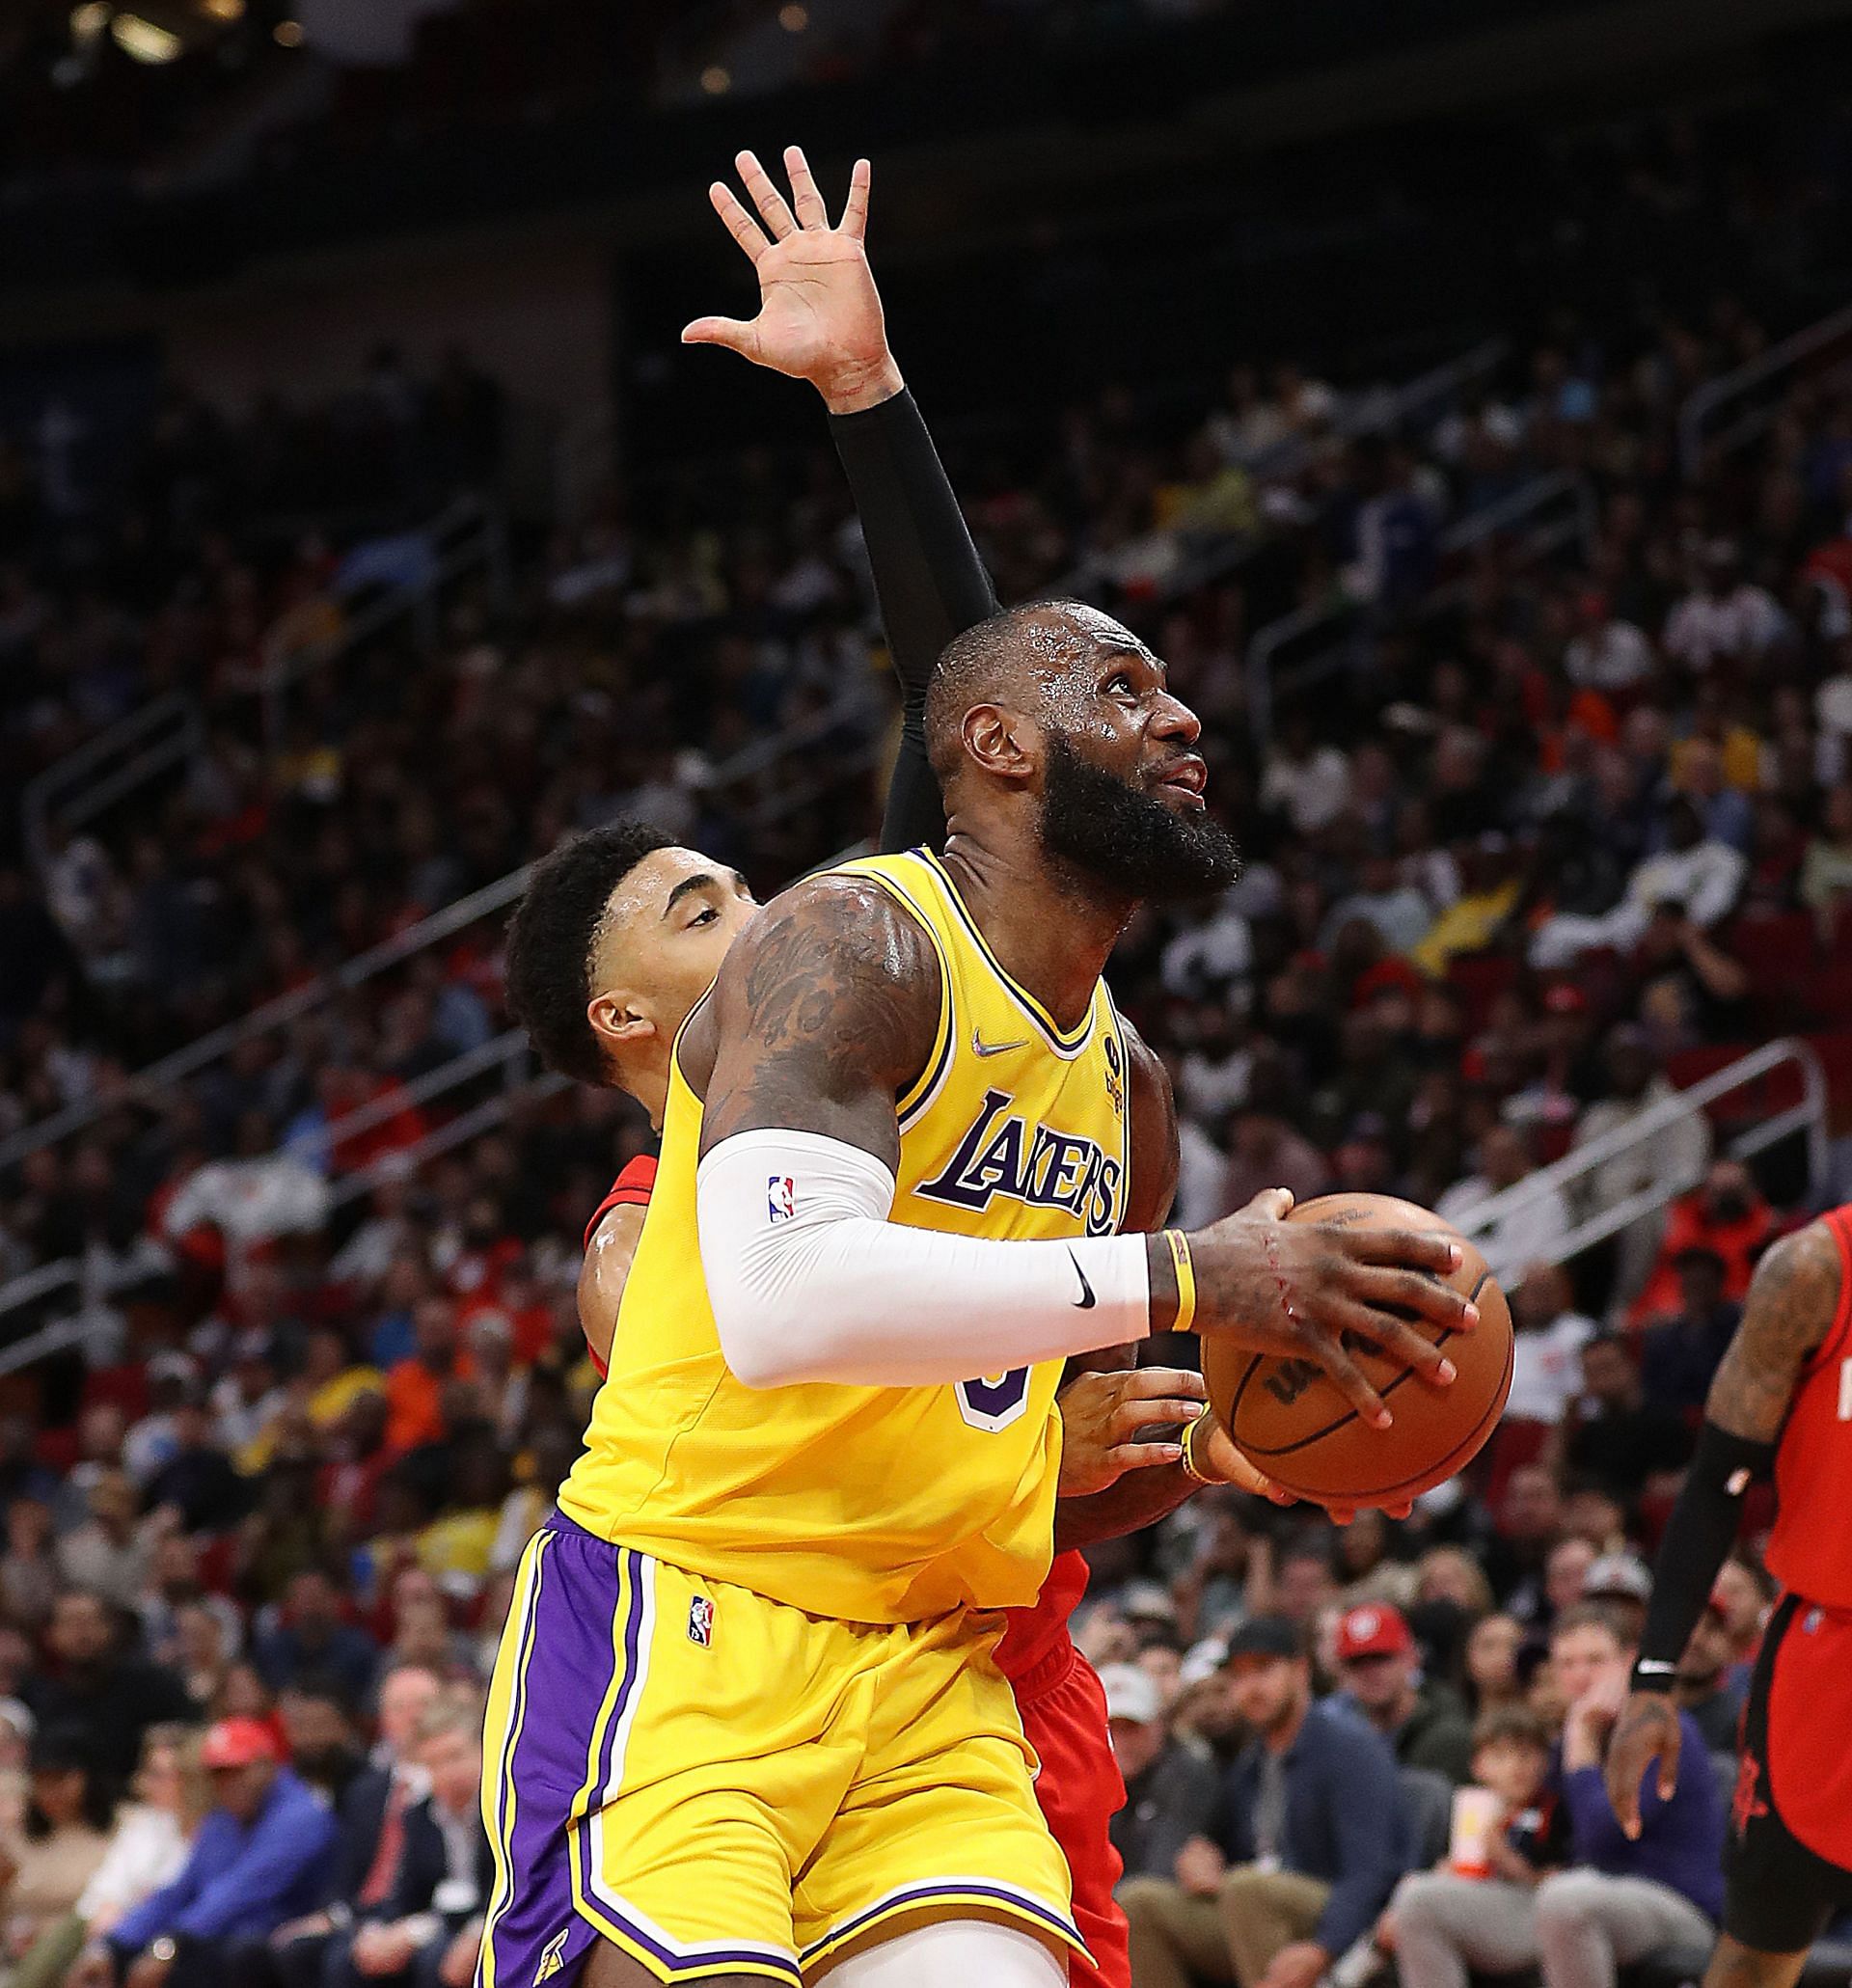 LeBron James of the LA Lakers drives to the basket against Kenyon Martin Jr. of the Houston Rockets during the fourth quarter at Toyota Center on Wednesday in Houston, Texas.